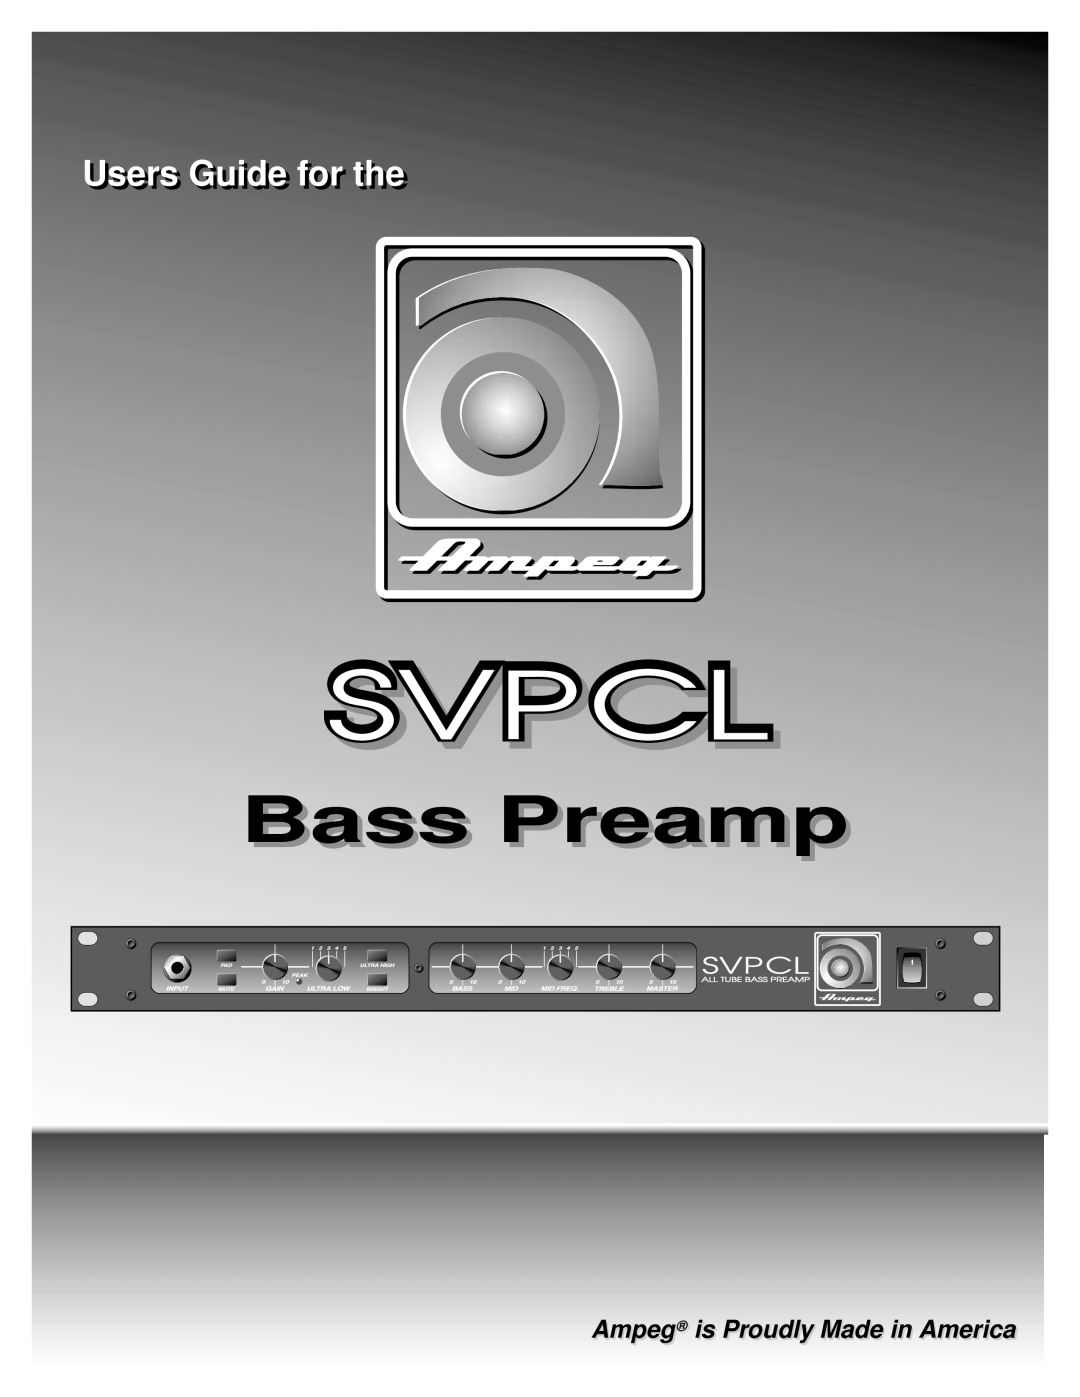 Ampeg SVPCL manual Ampeg is Proudly Made in America, Bass Preamp, Usersrs Guidei forf r thet 